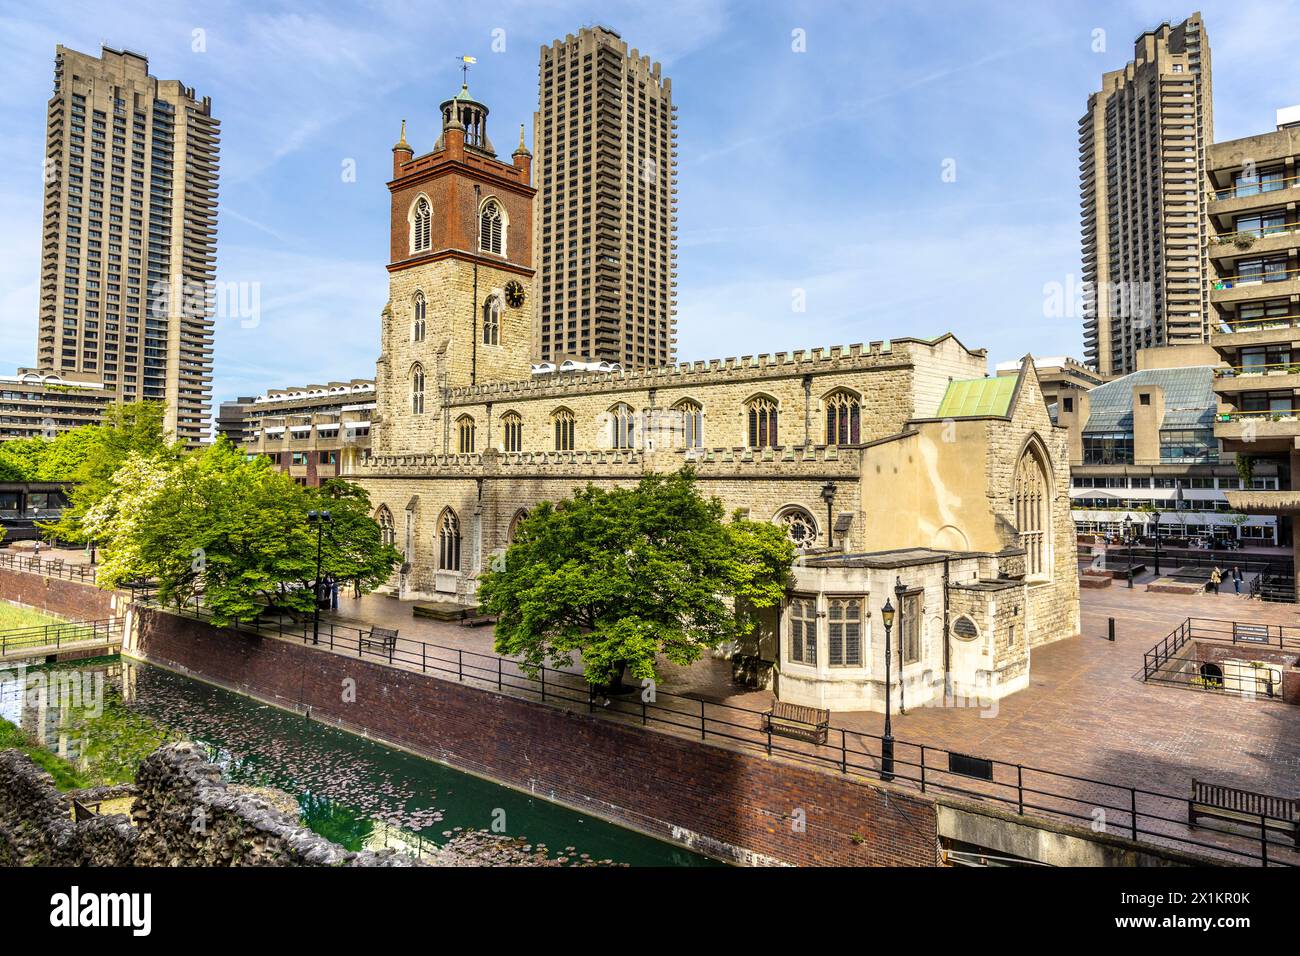 Medieval St Giles Cripplegate Church located on the Barbican Estate with brutalist high rise towers in background, London, England Stock Photo